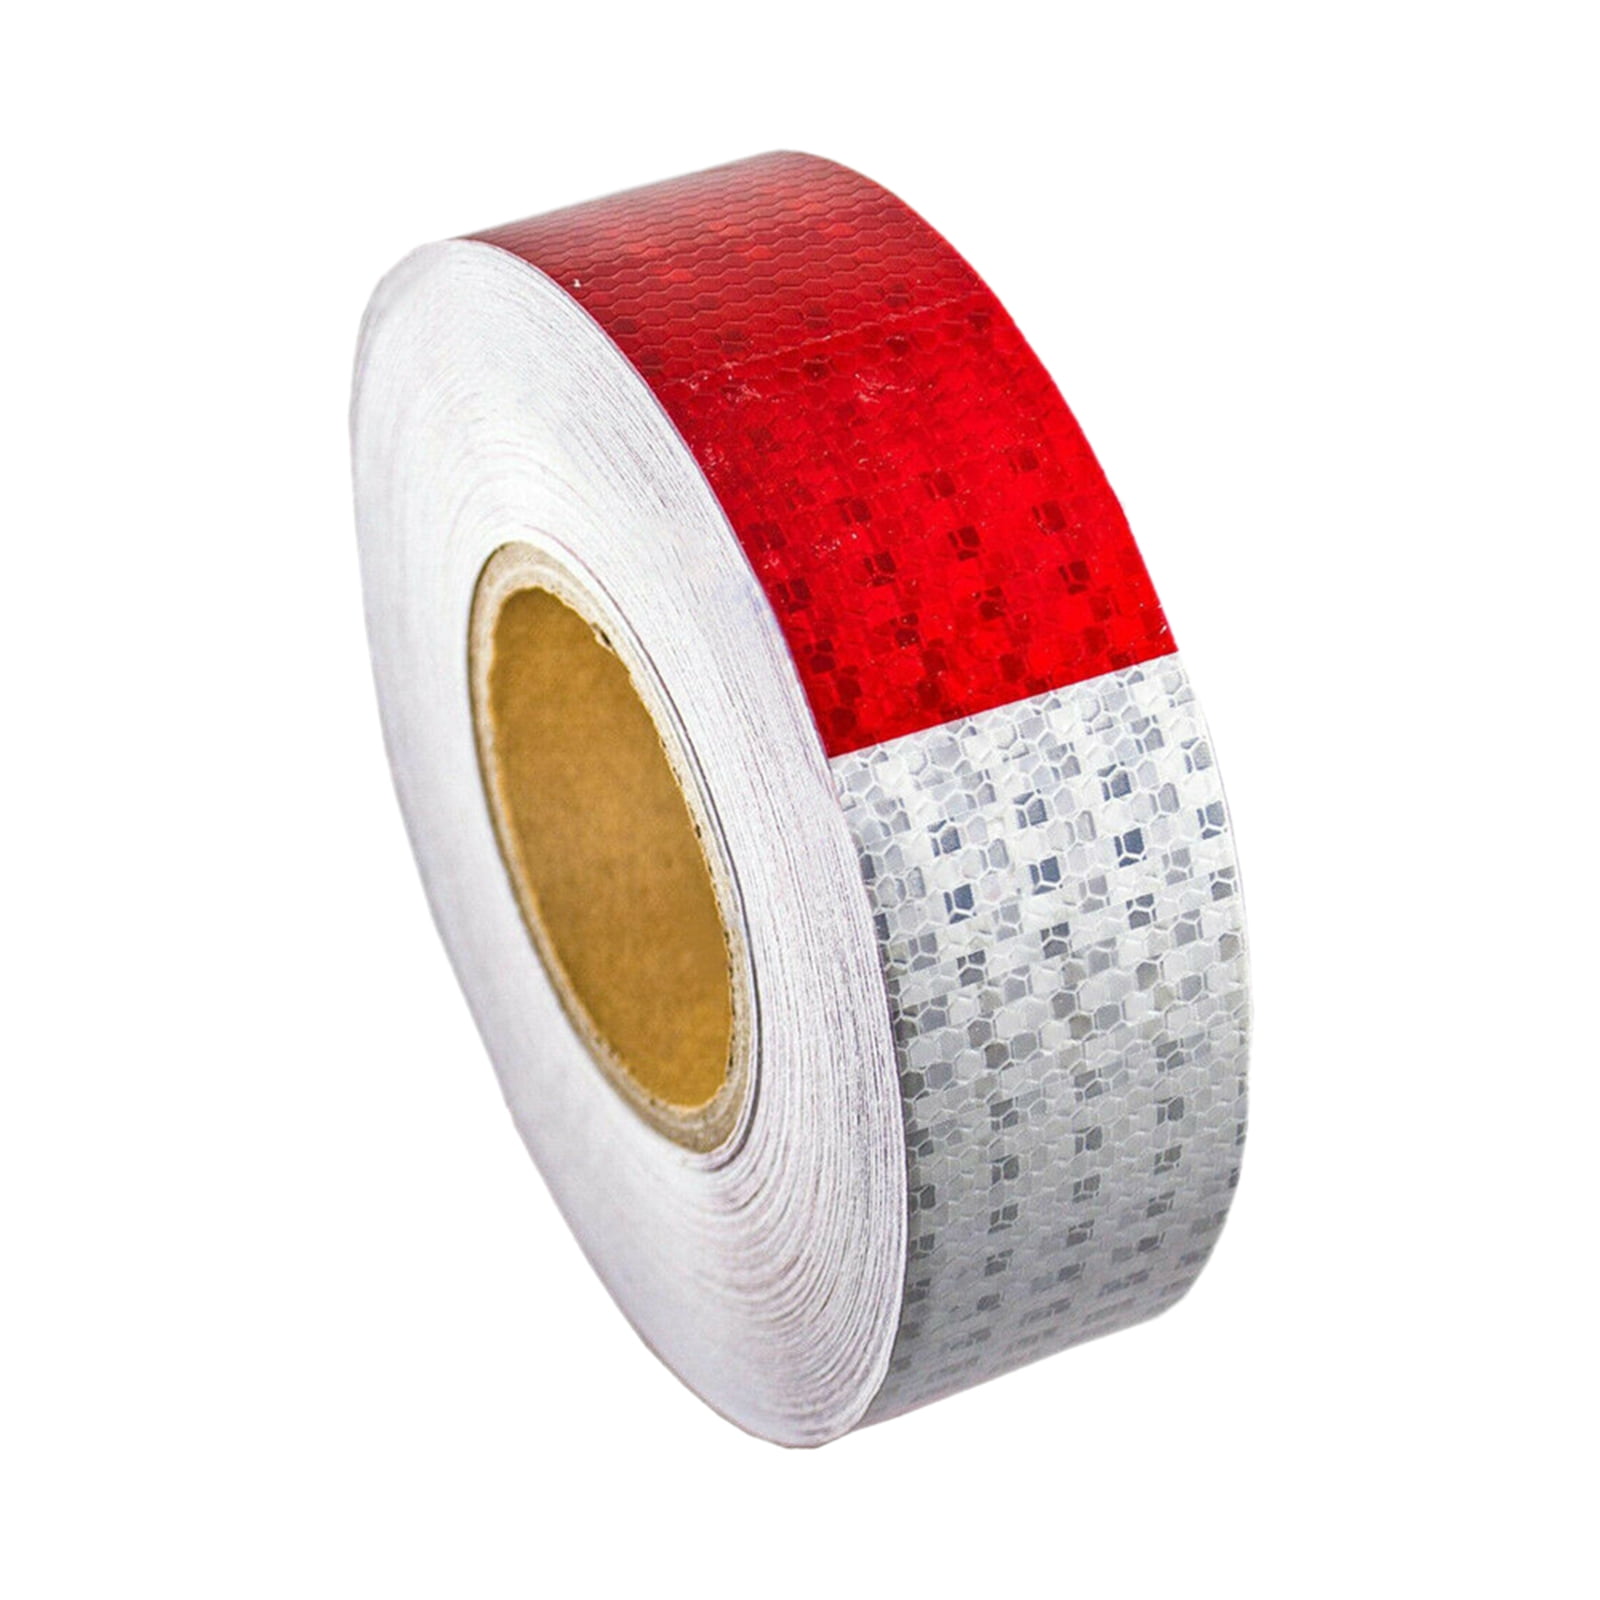 WHITE Reflective   Conspicuity  Tape 2" x  100 feet DOT-C2 